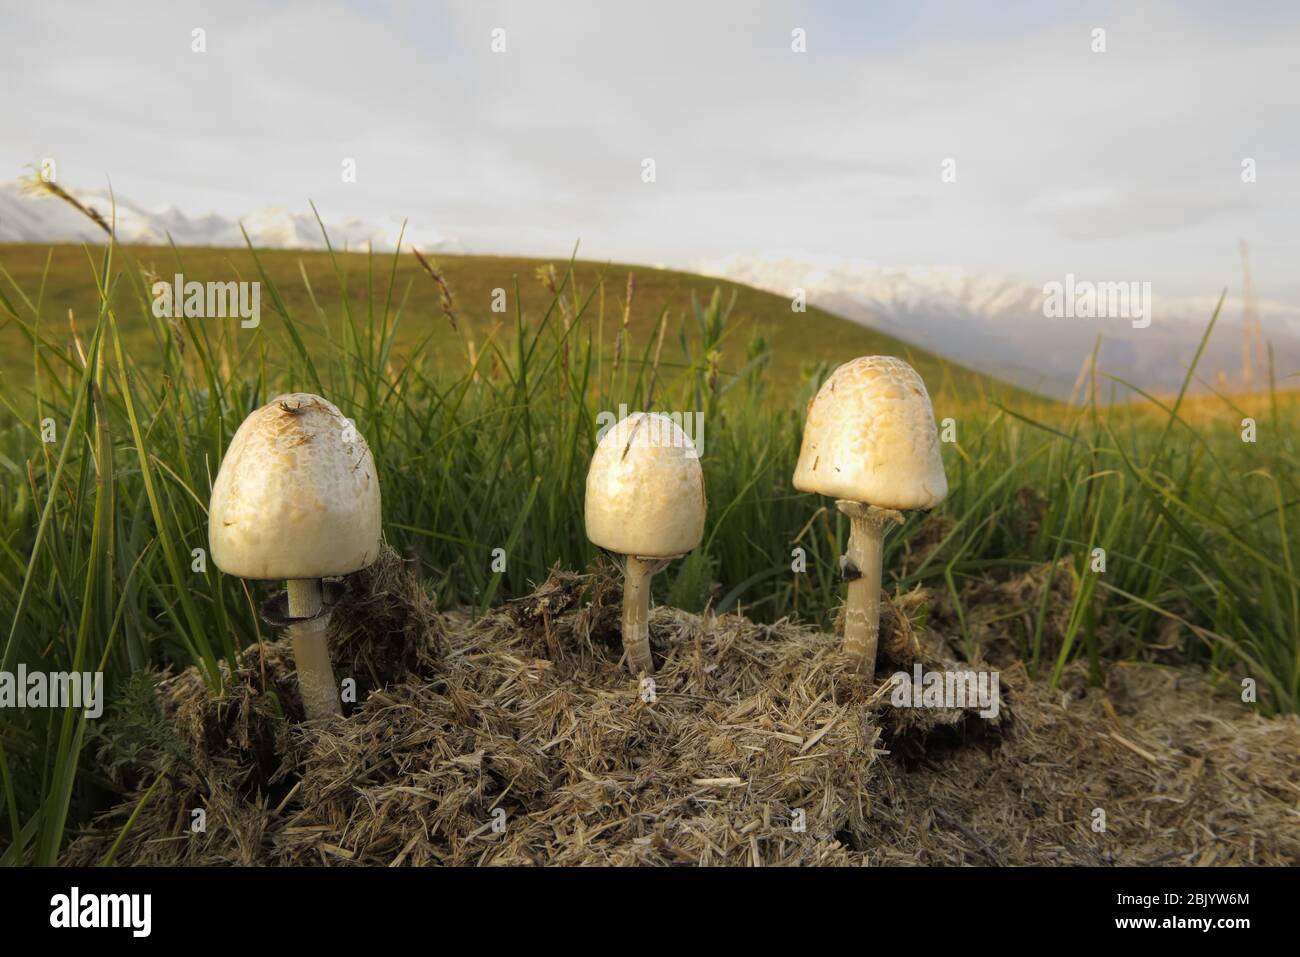 A Ink cap mushrooms growing on old cow manure Stock Photo